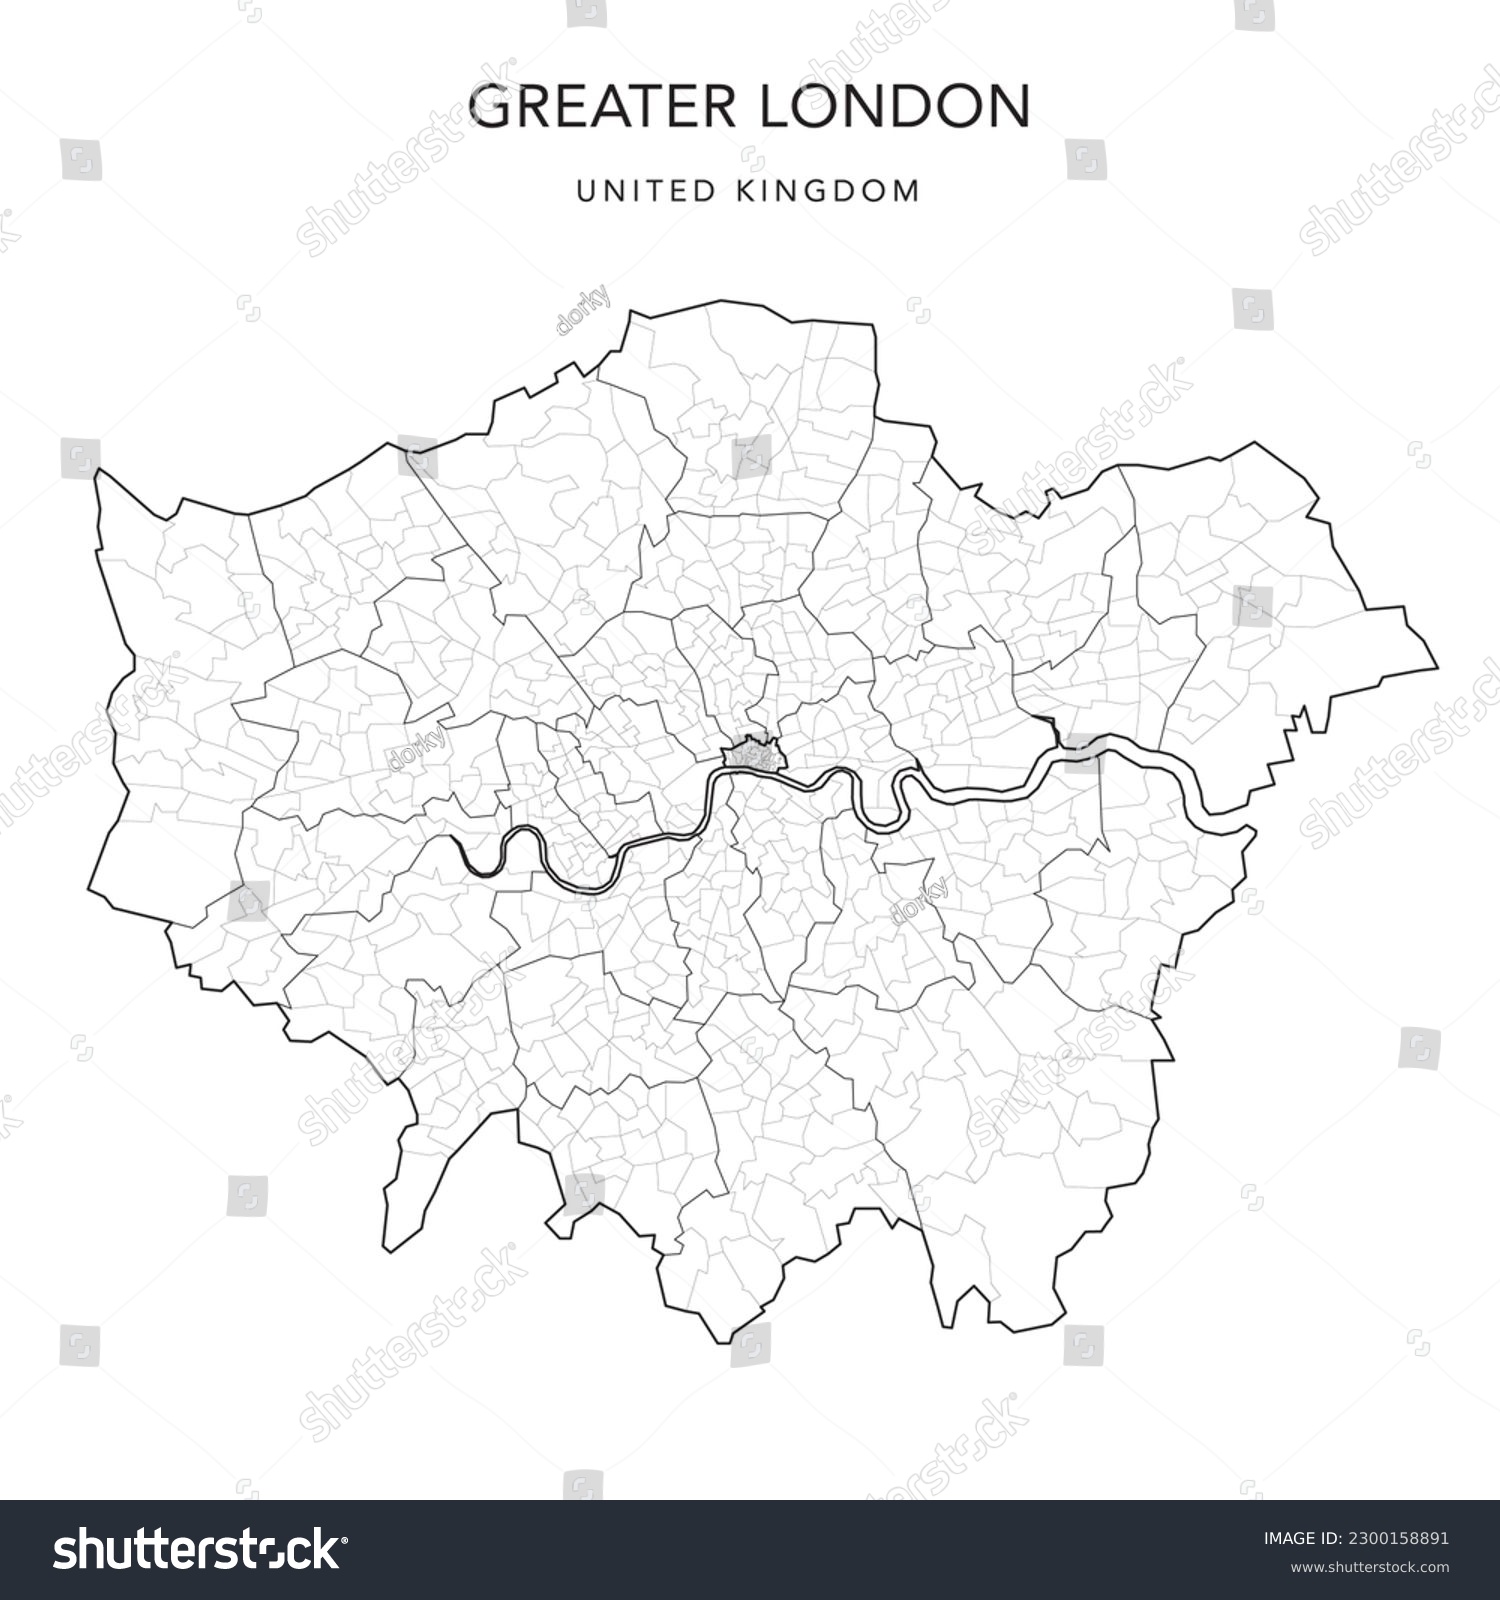 Administrative Map Of The Greater London And The Royalty Free Stock Vector 2300158891 4941